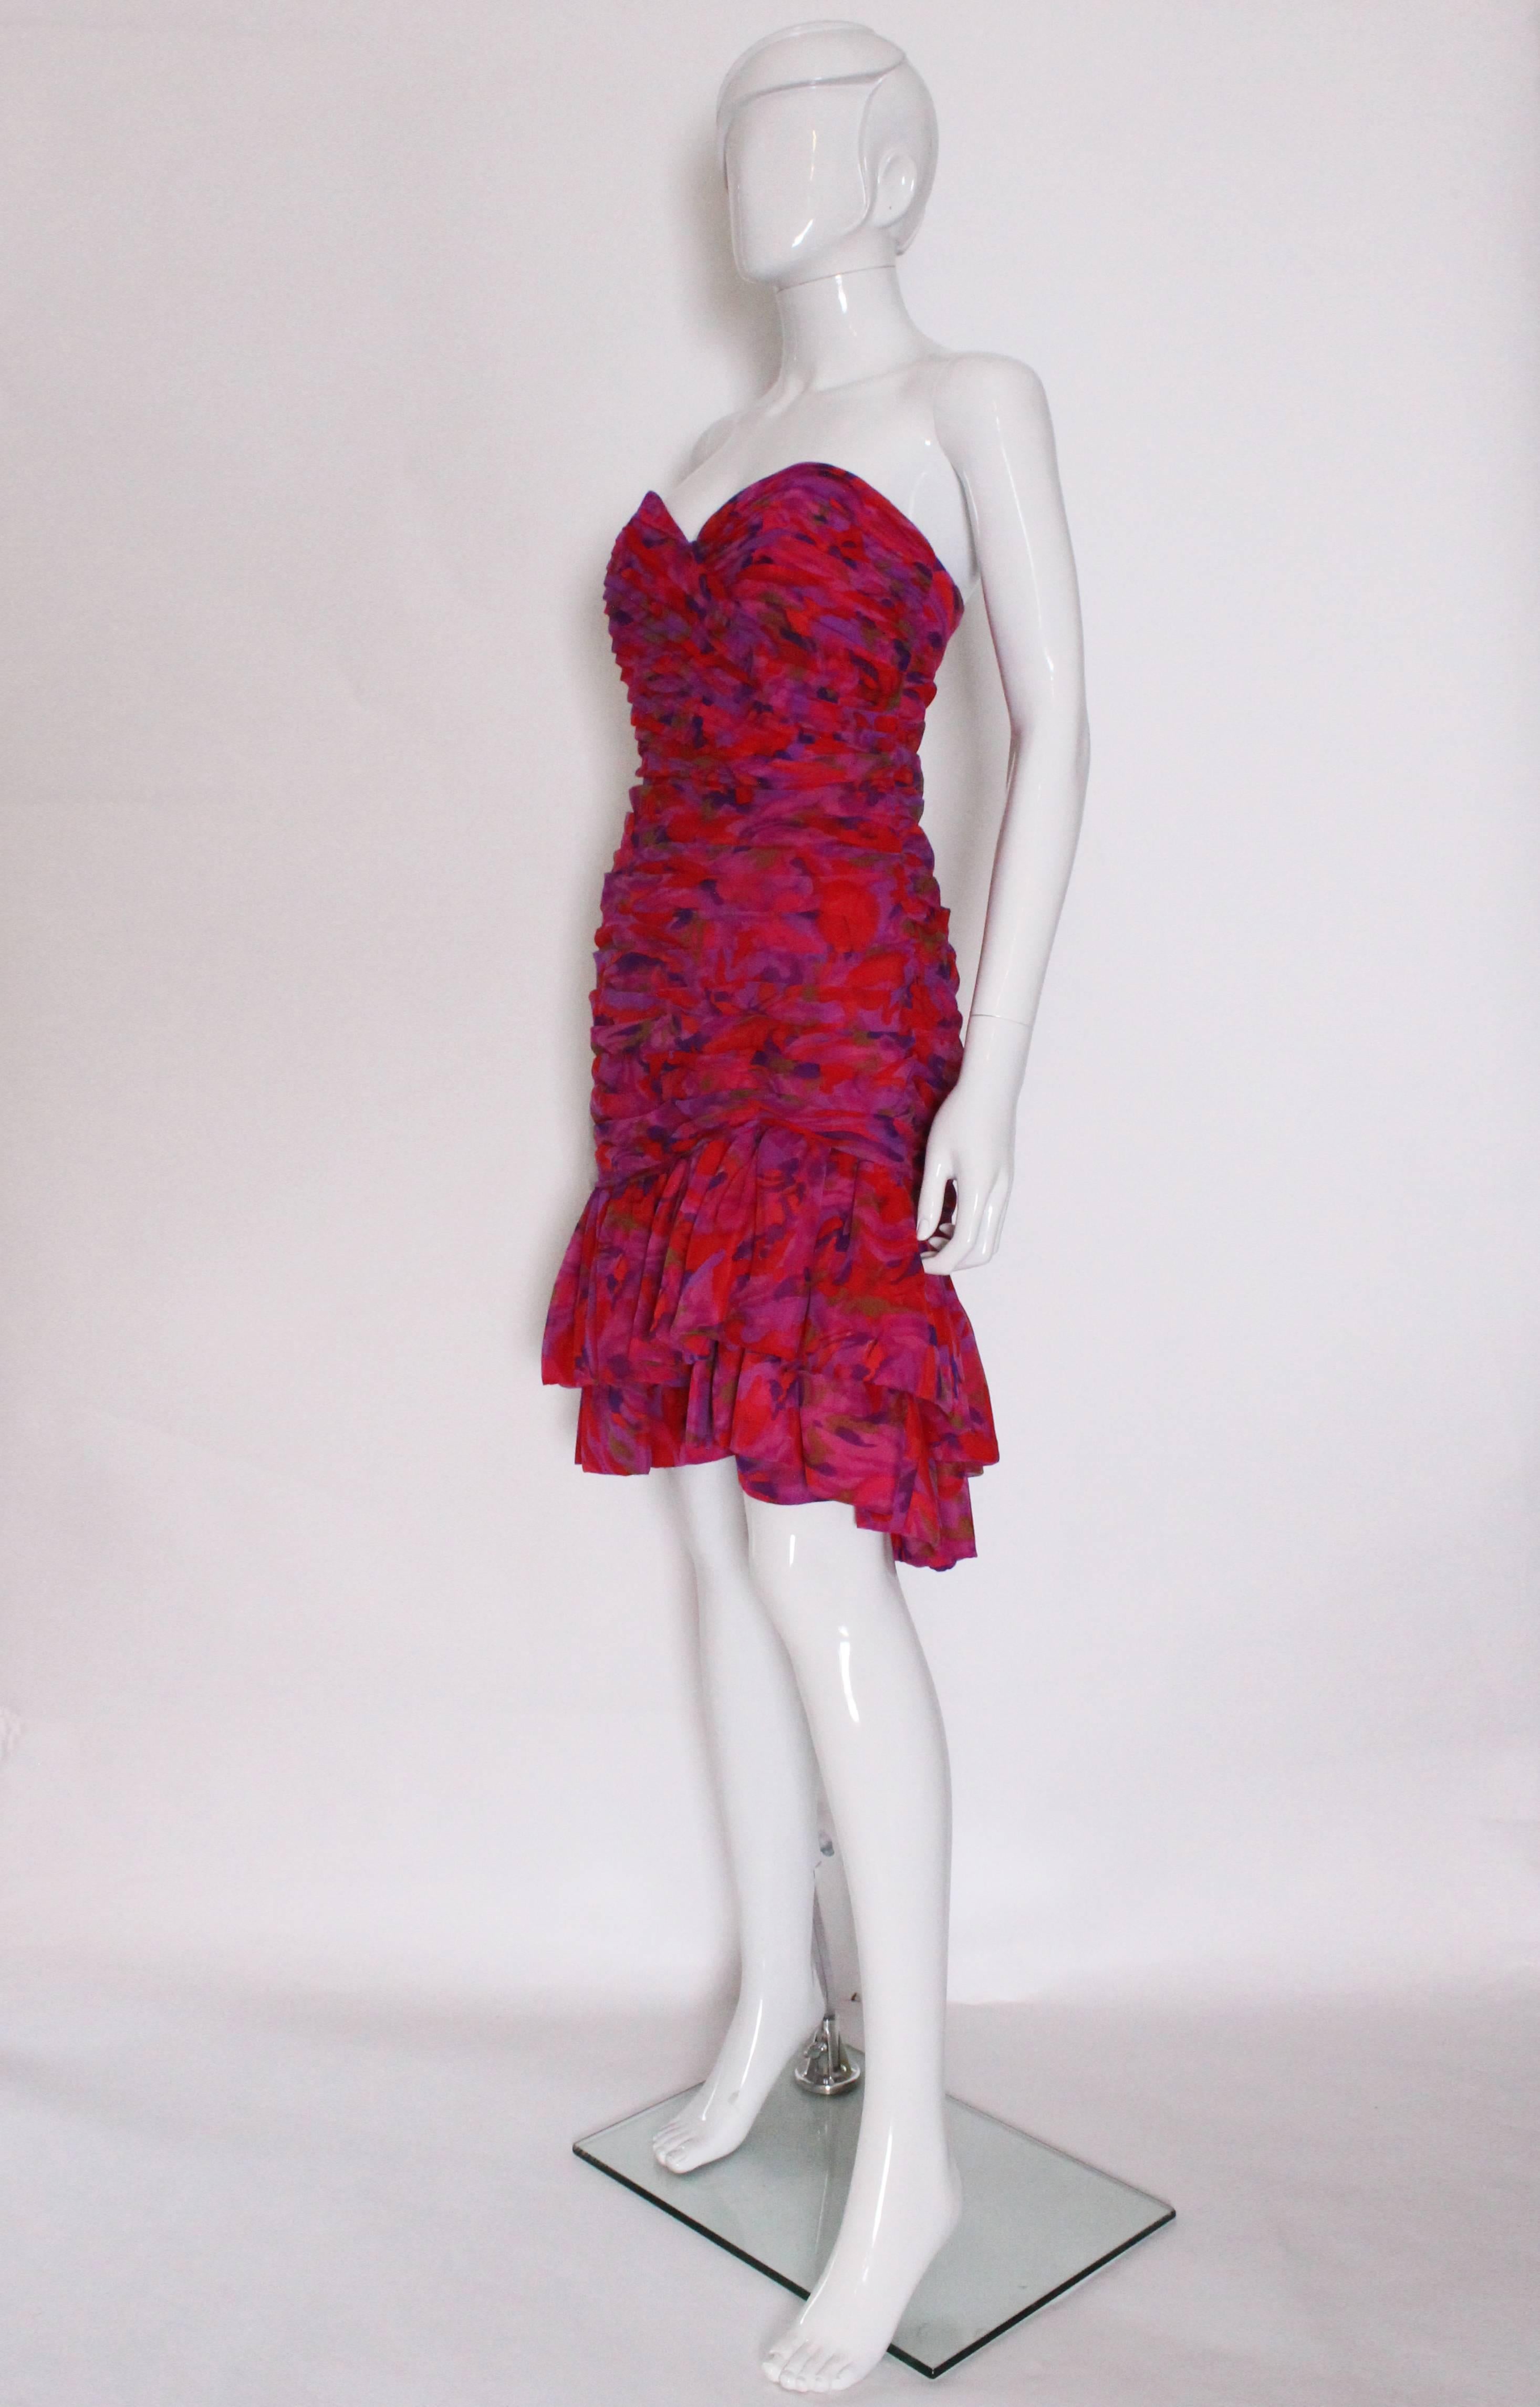 A wonderful party dress by British firm Quorum.
This dress is a wonderful mix of colours in red,purple ,mauve ,olive and pink.
The dress is strapless,with folds of fabric from the bust to a drop waist .The dress ends with two rows of frills